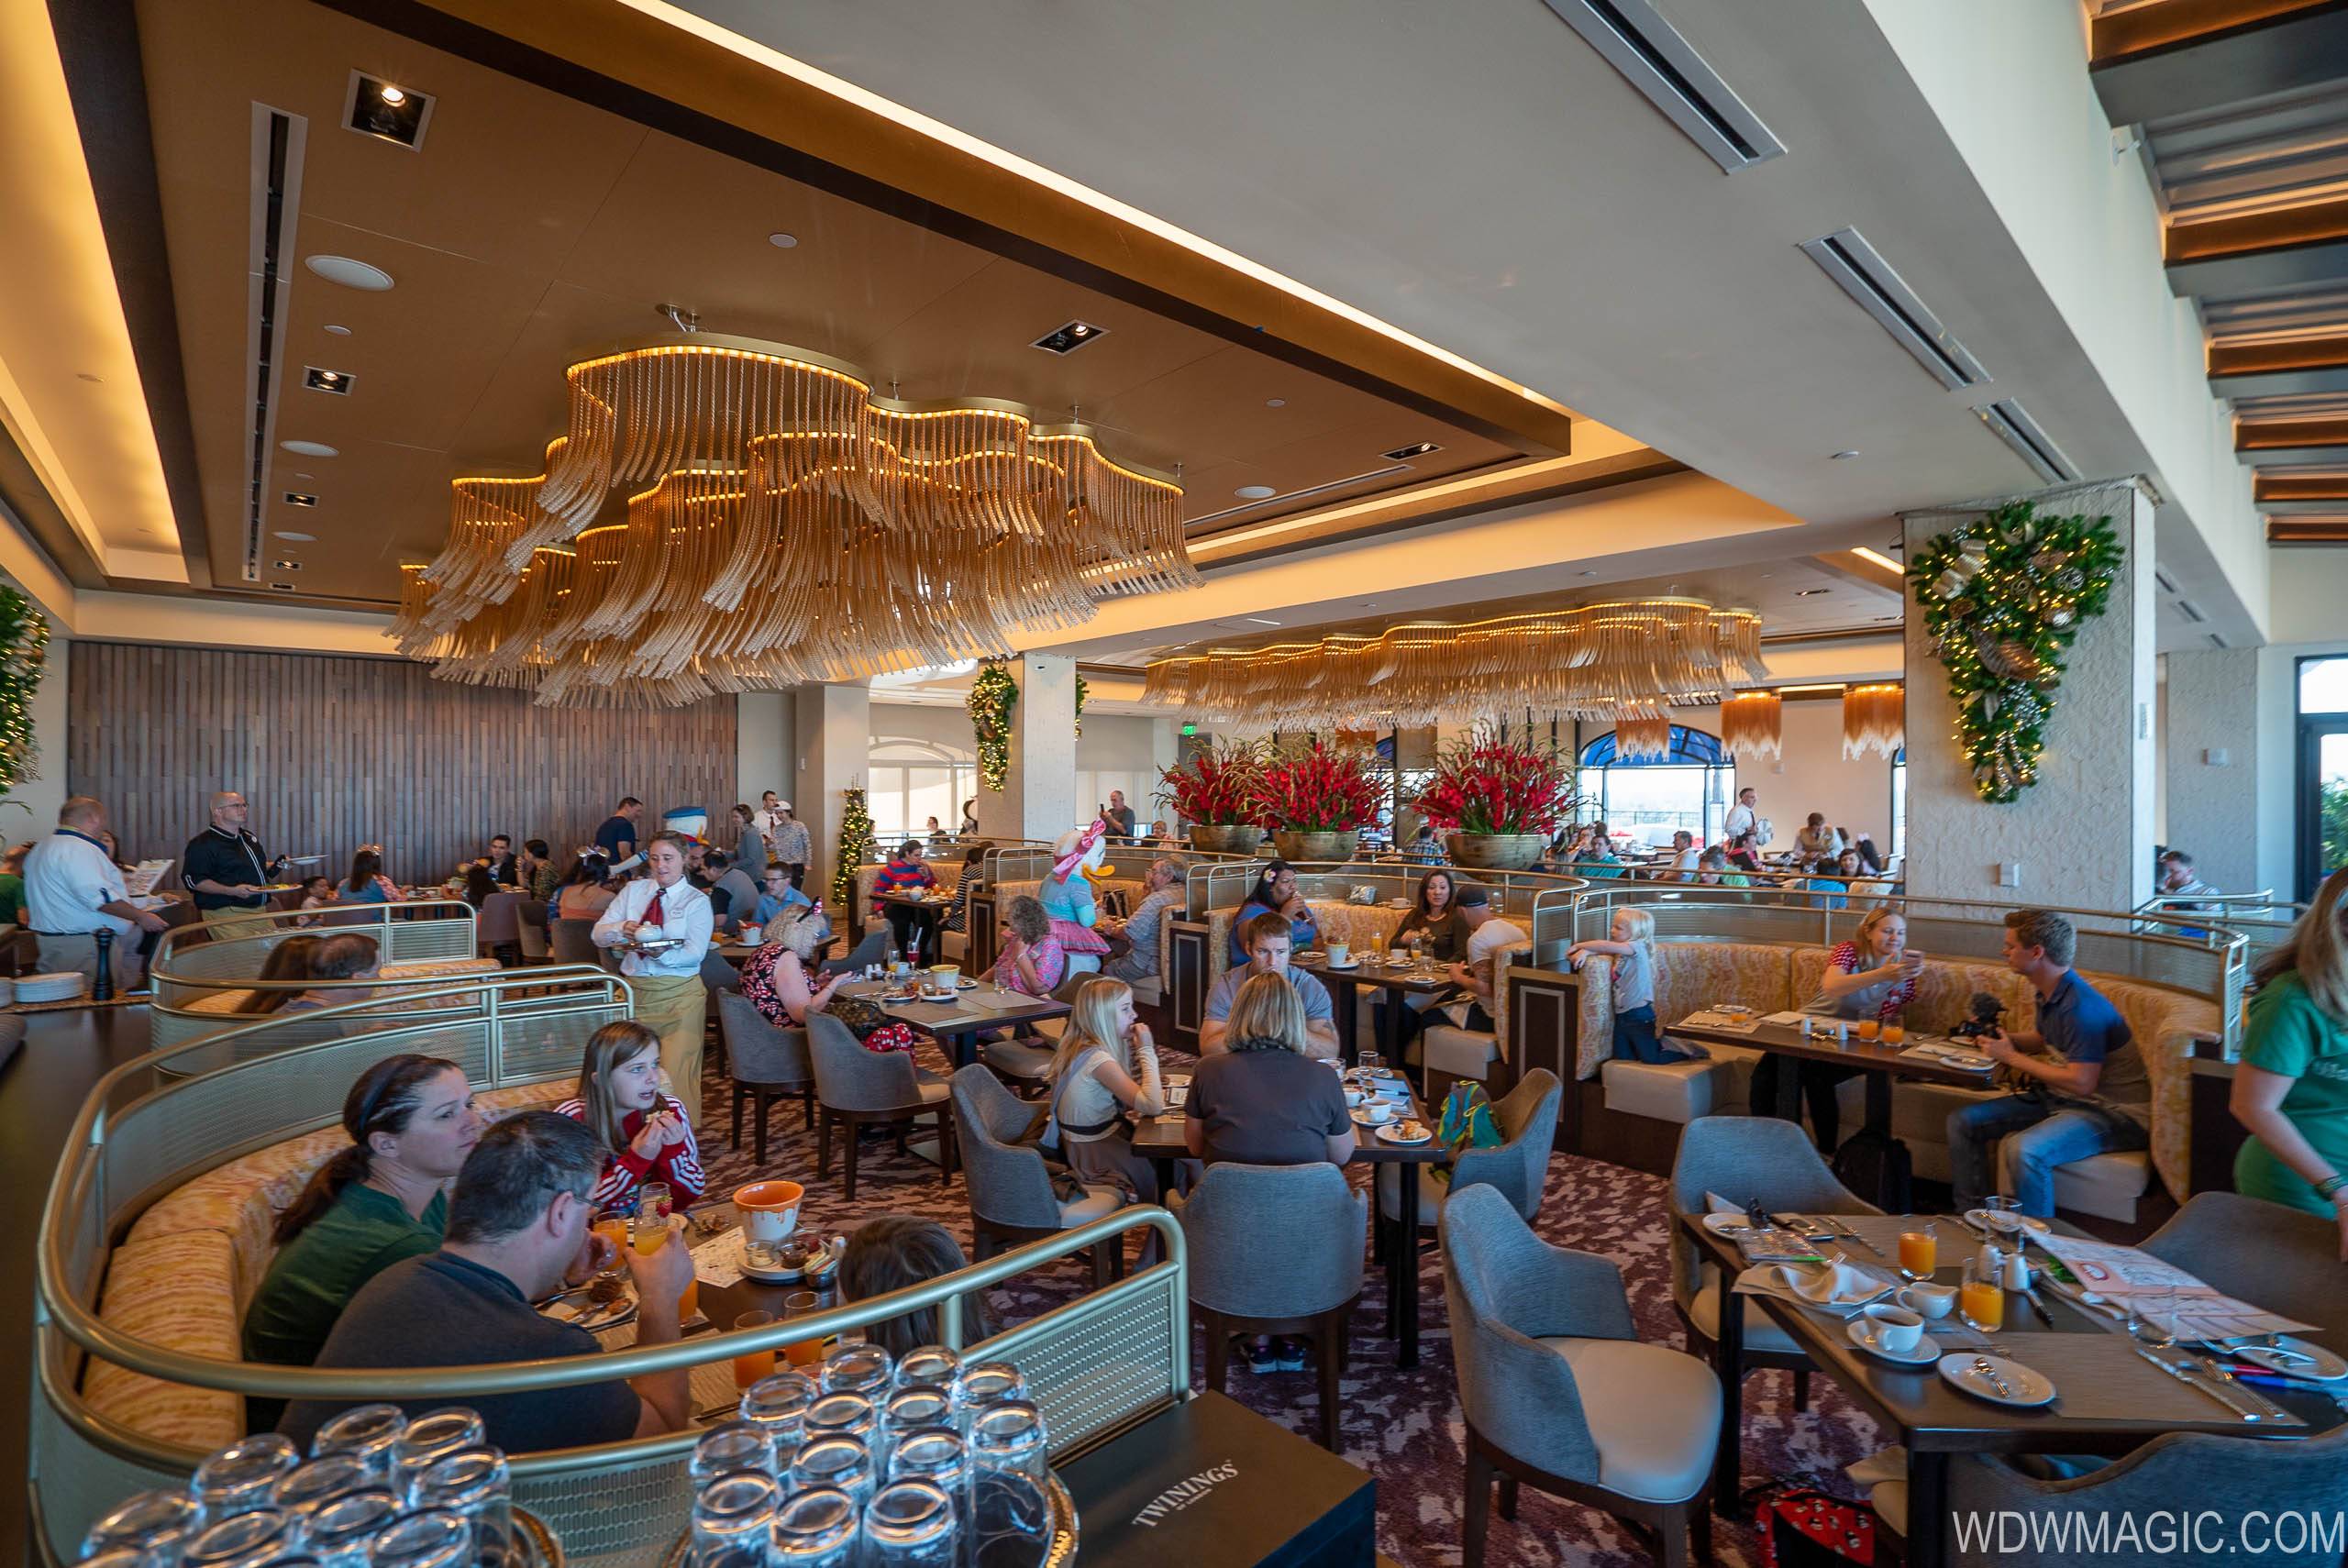 A&nbsp;modified Character Dining experience will be available at Topolino's Terrace in the Riviera Resort